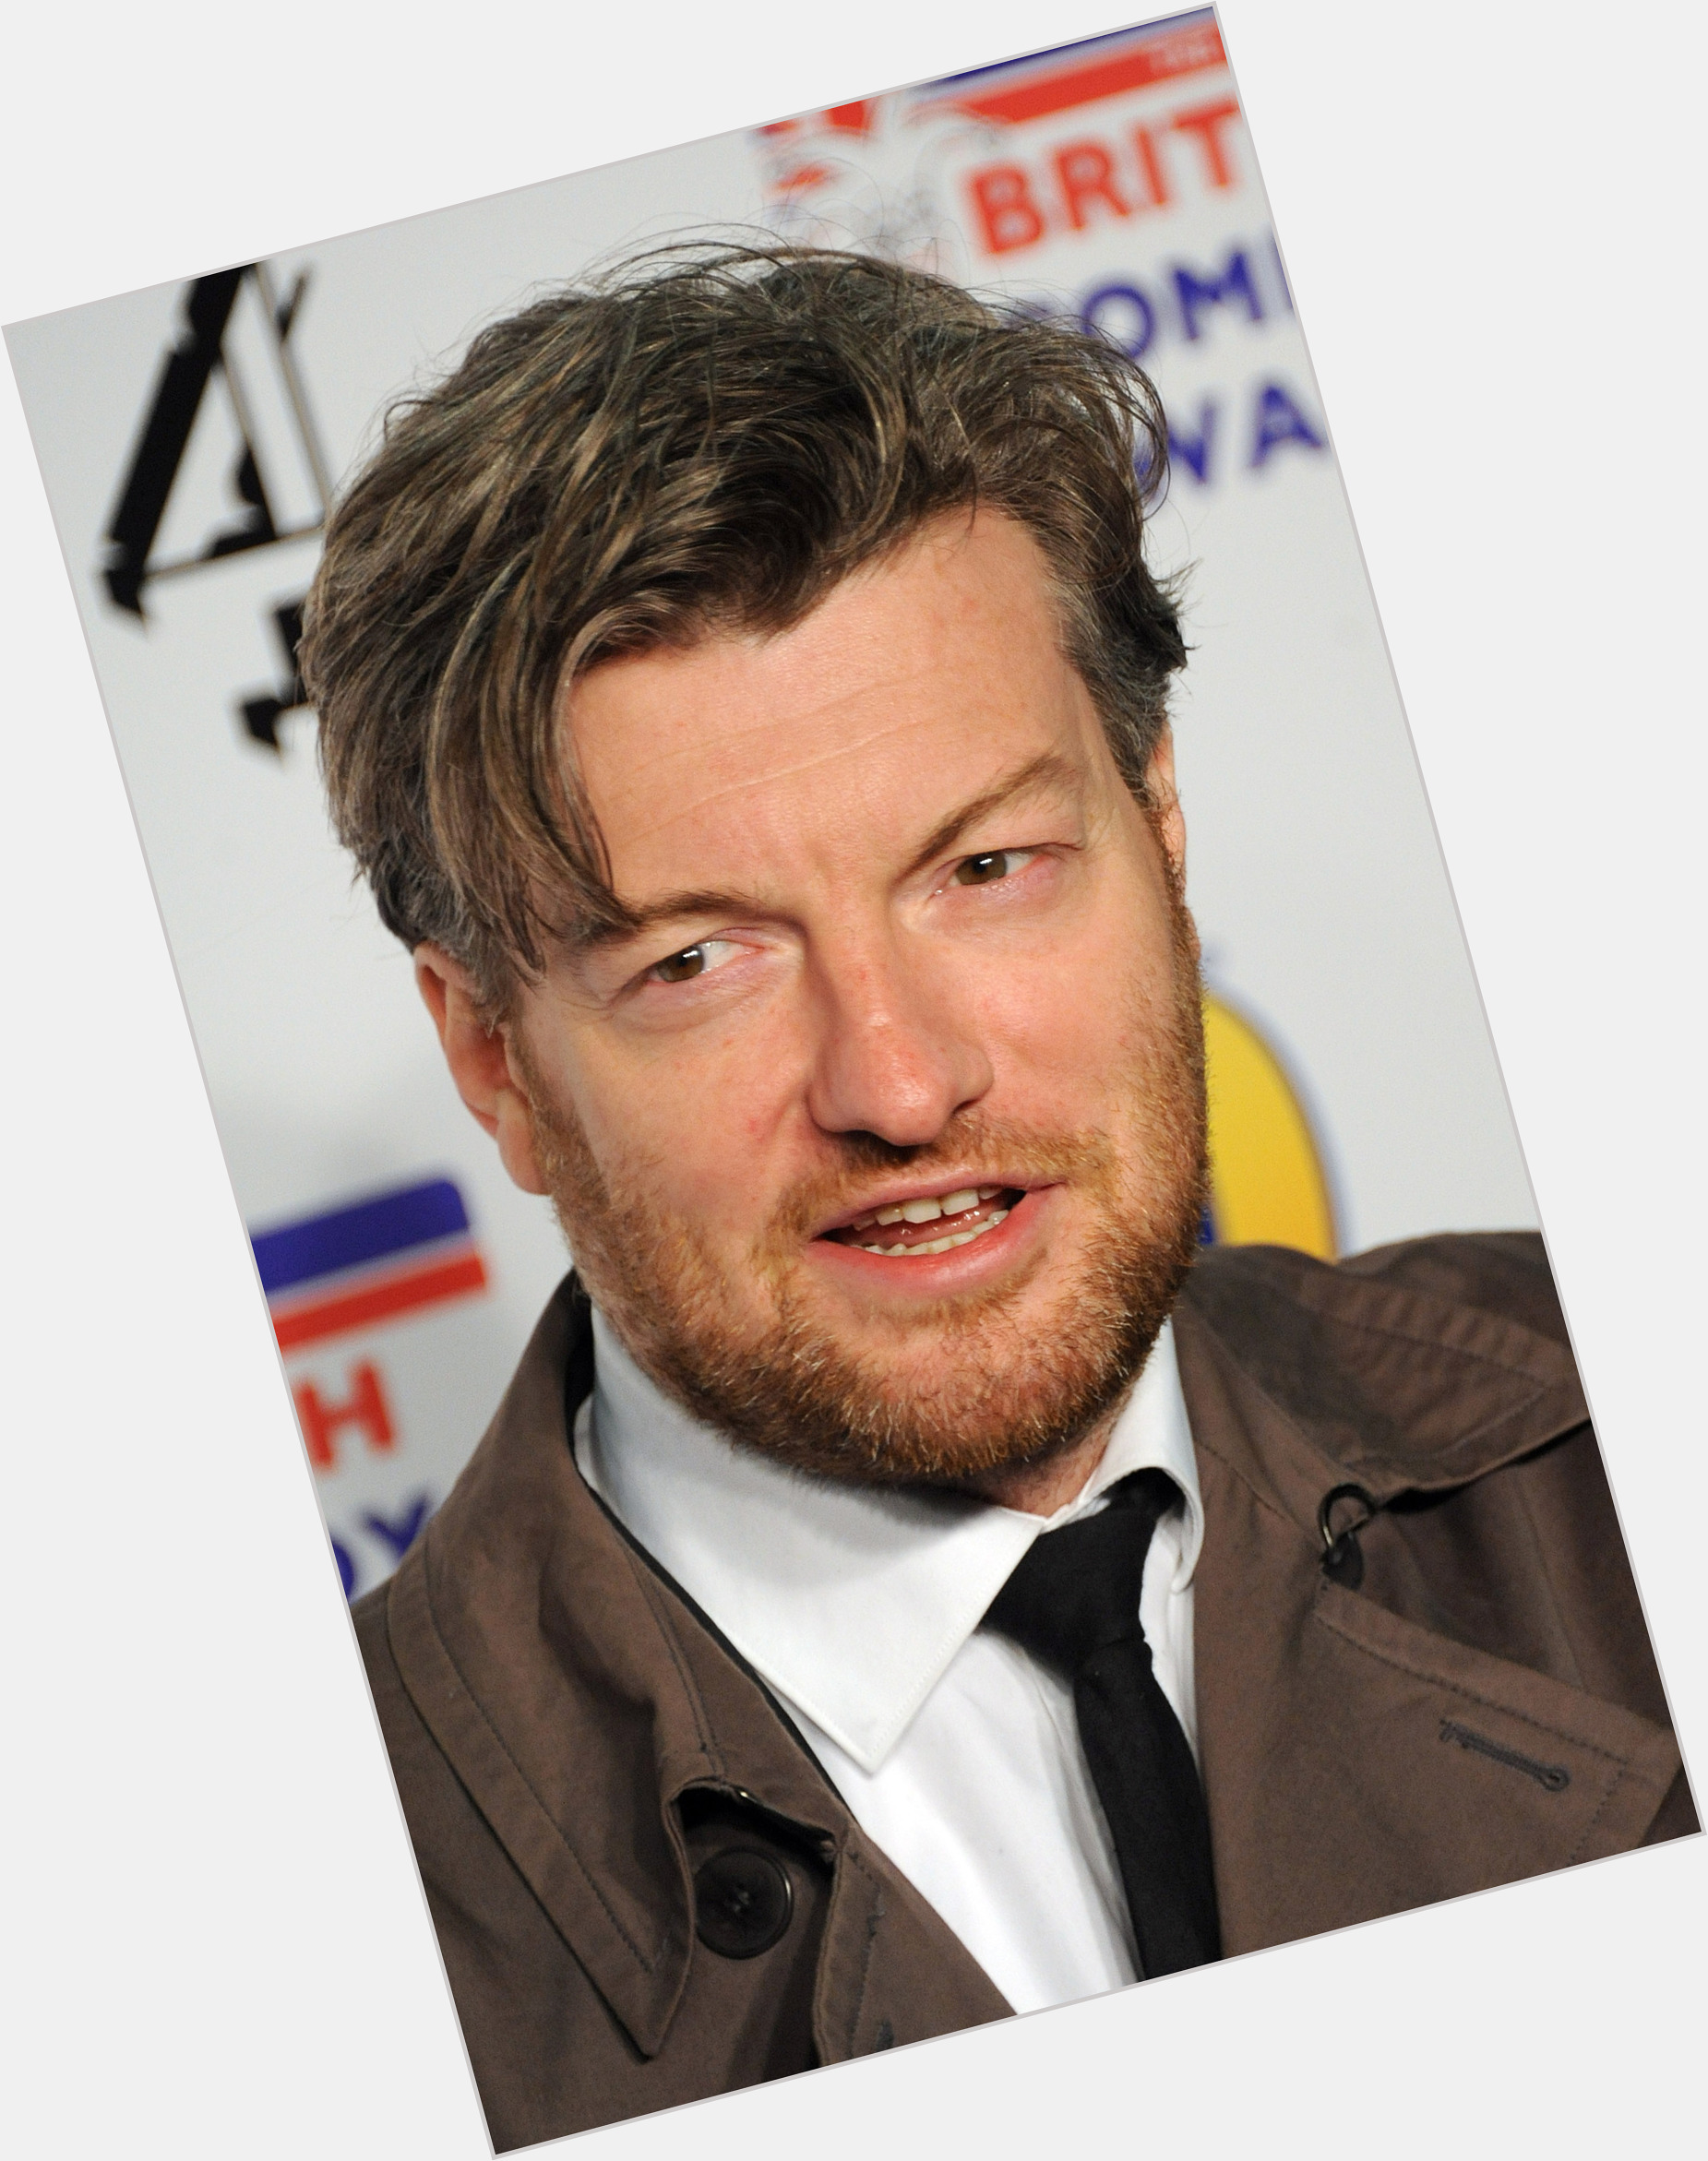 <a href="/hot-men/charlie-brooker/where-dating-news-photos">Charlie Brooker</a> Average body,  salt and pepper hair & hairstyles